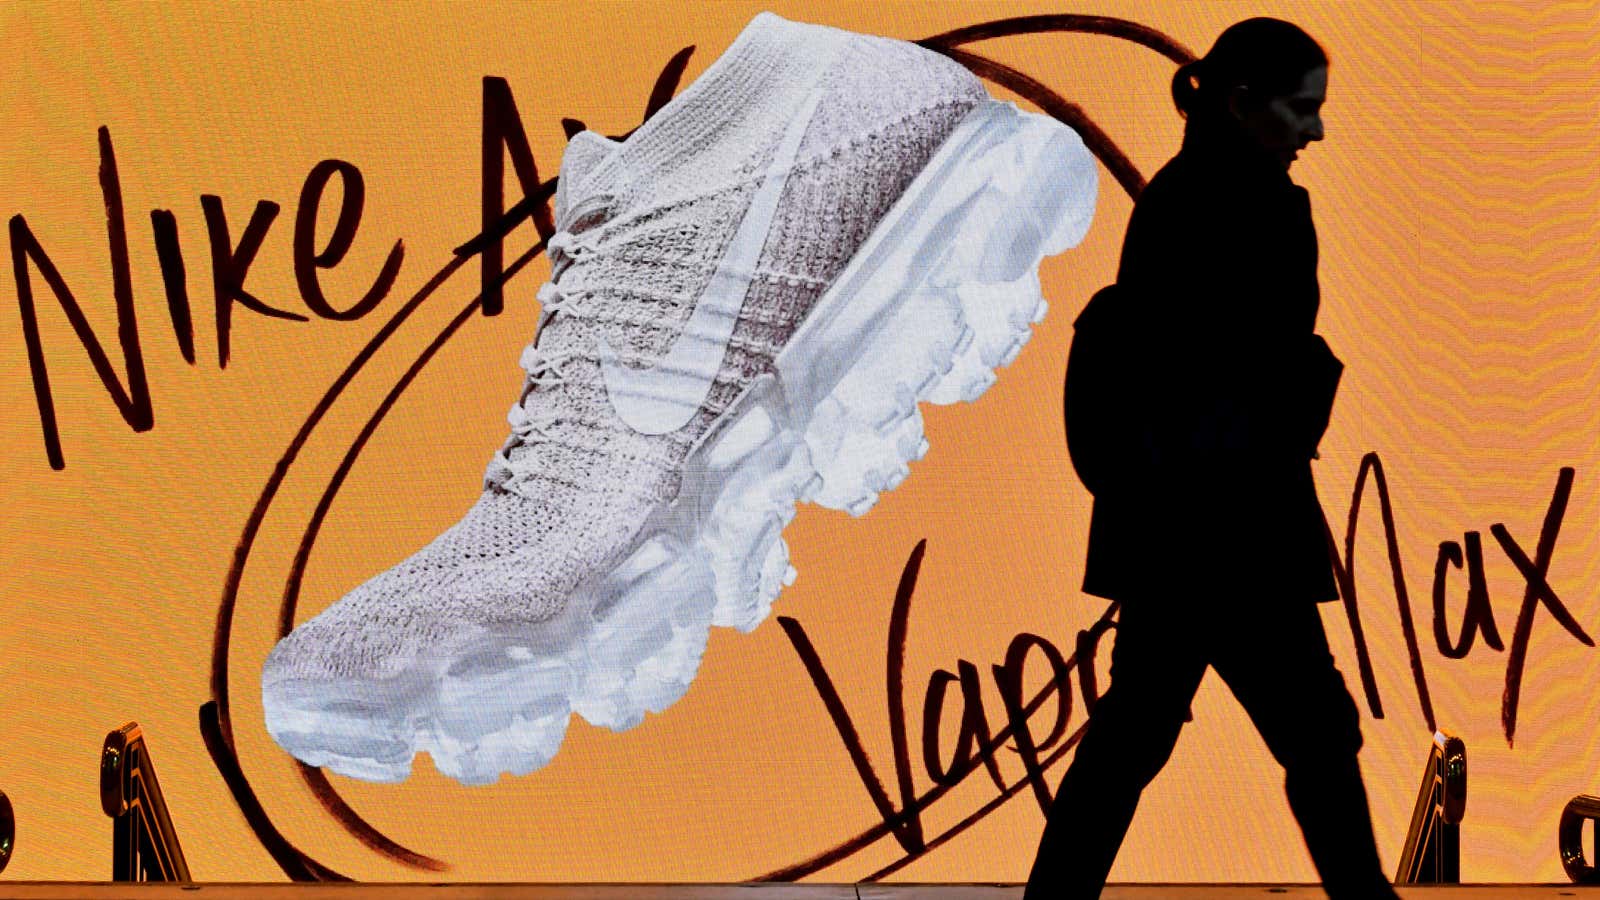 The VaporMax is one of Nike’s best bets going forward.